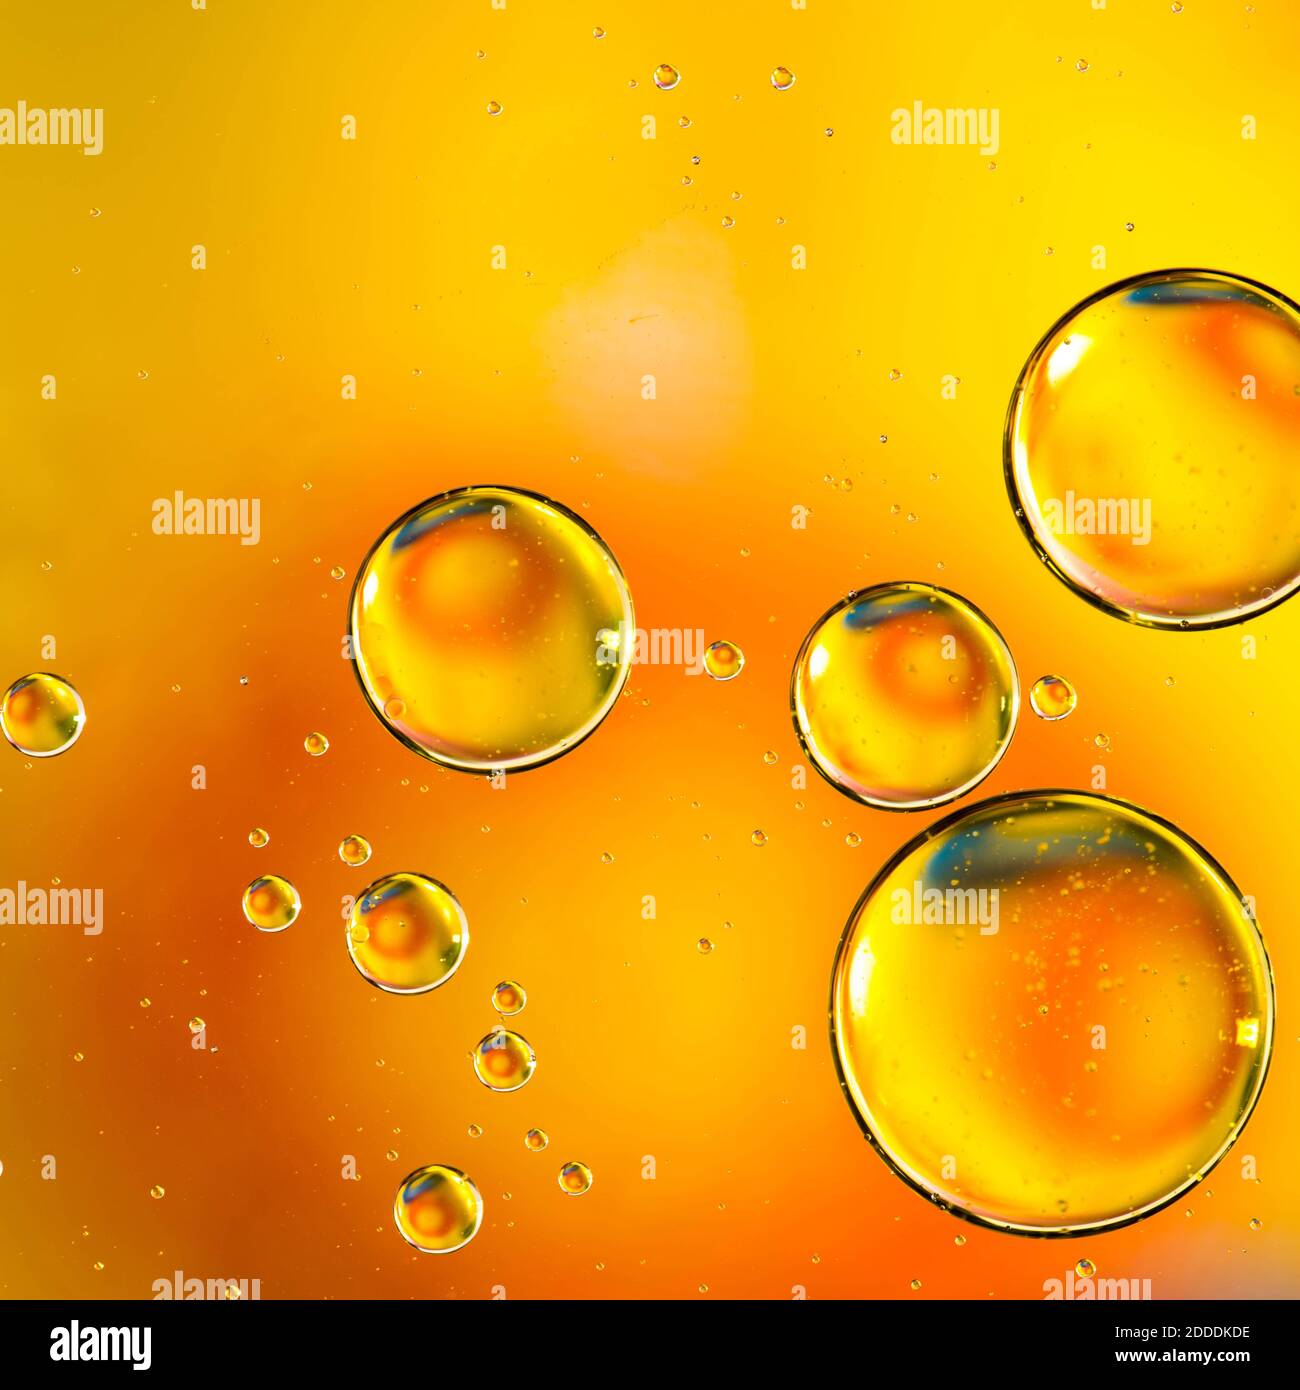 Oil drops in water, bubbles on orange abstract background Stock Photo